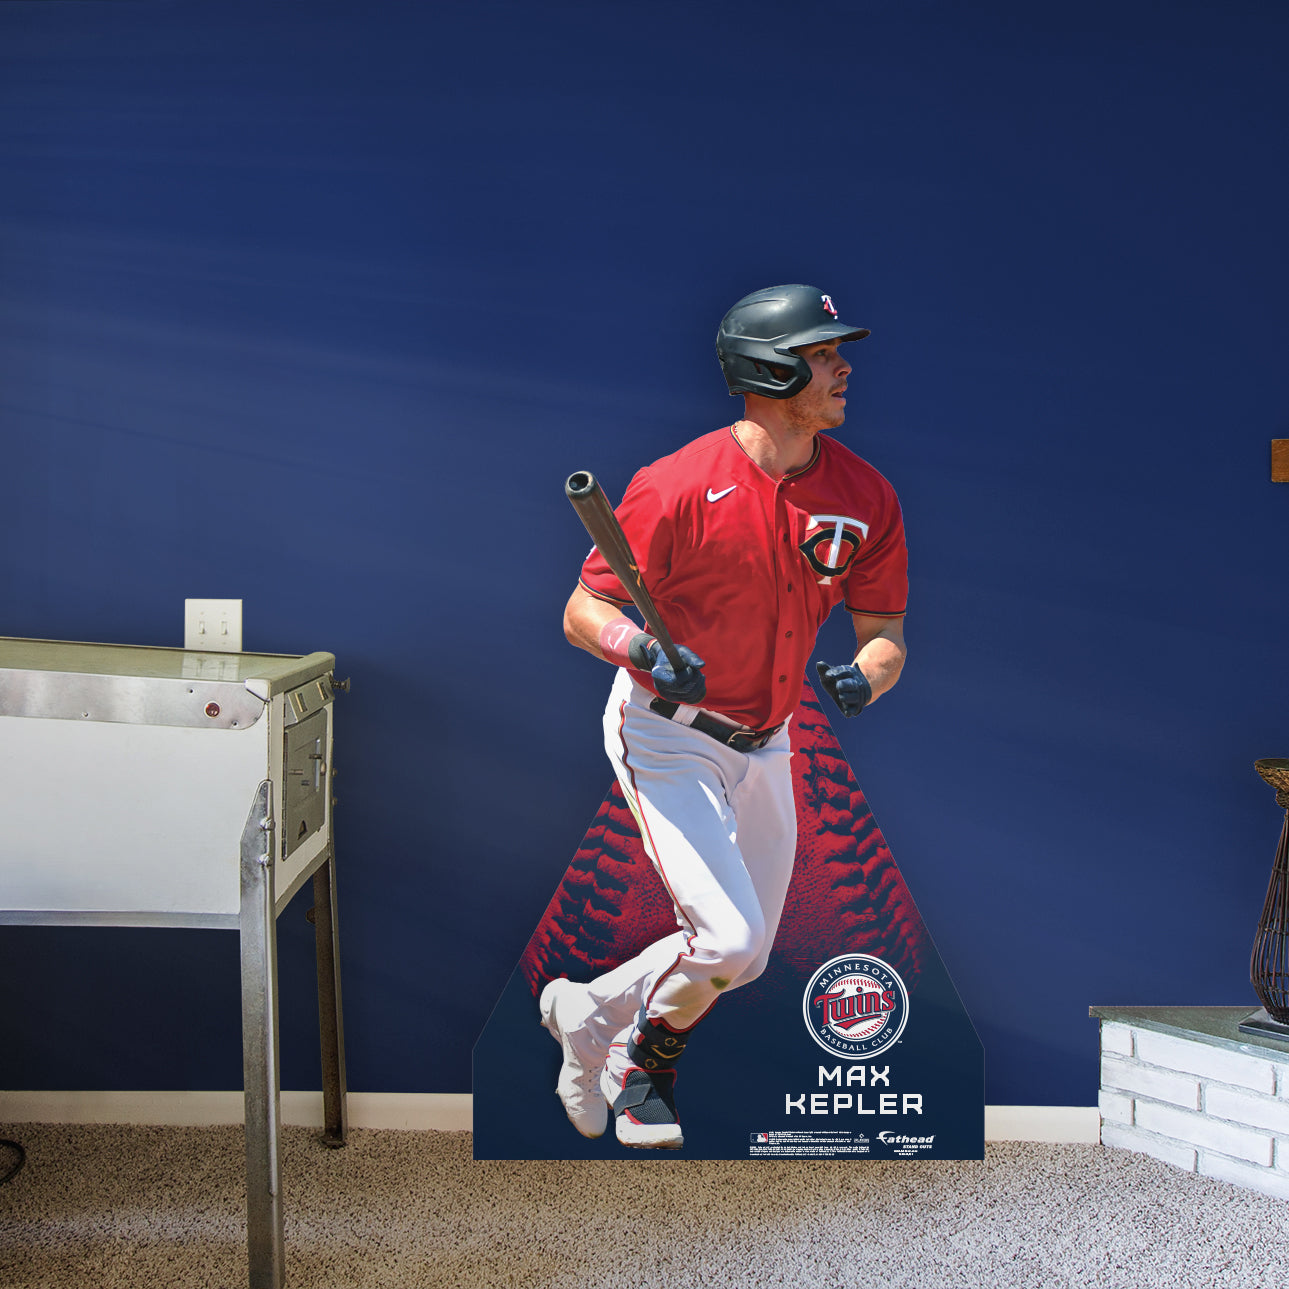 Texas Rangers: Corey Seager 2022 Mini Cardstock Cutout - Officially  Licensed MLB Stand Out